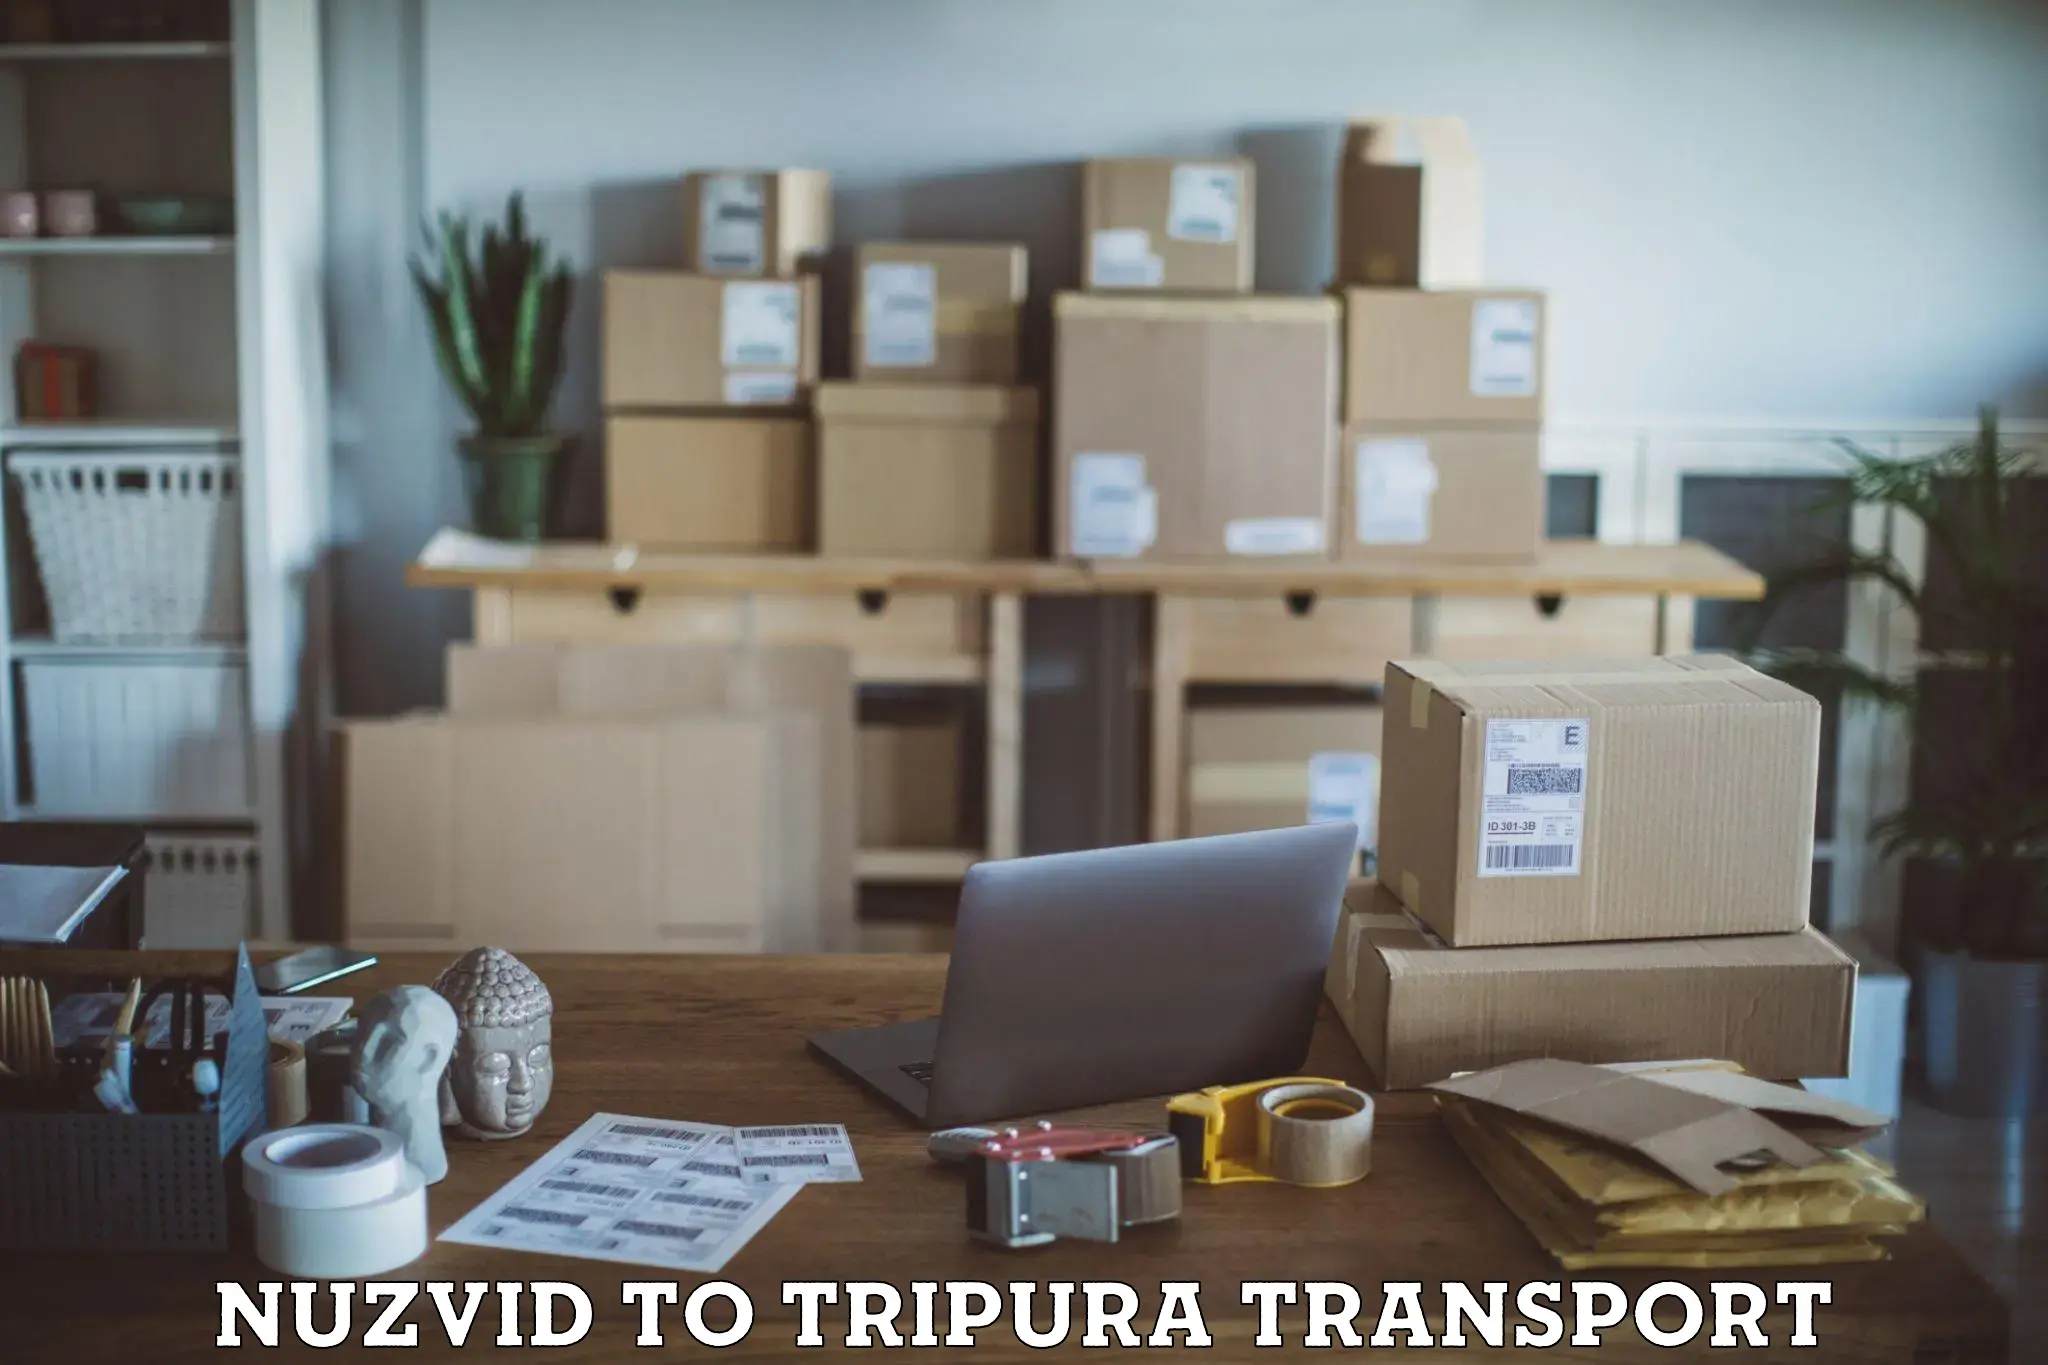 Transport bike from one state to another Nuzvid to Udaipur Tripura